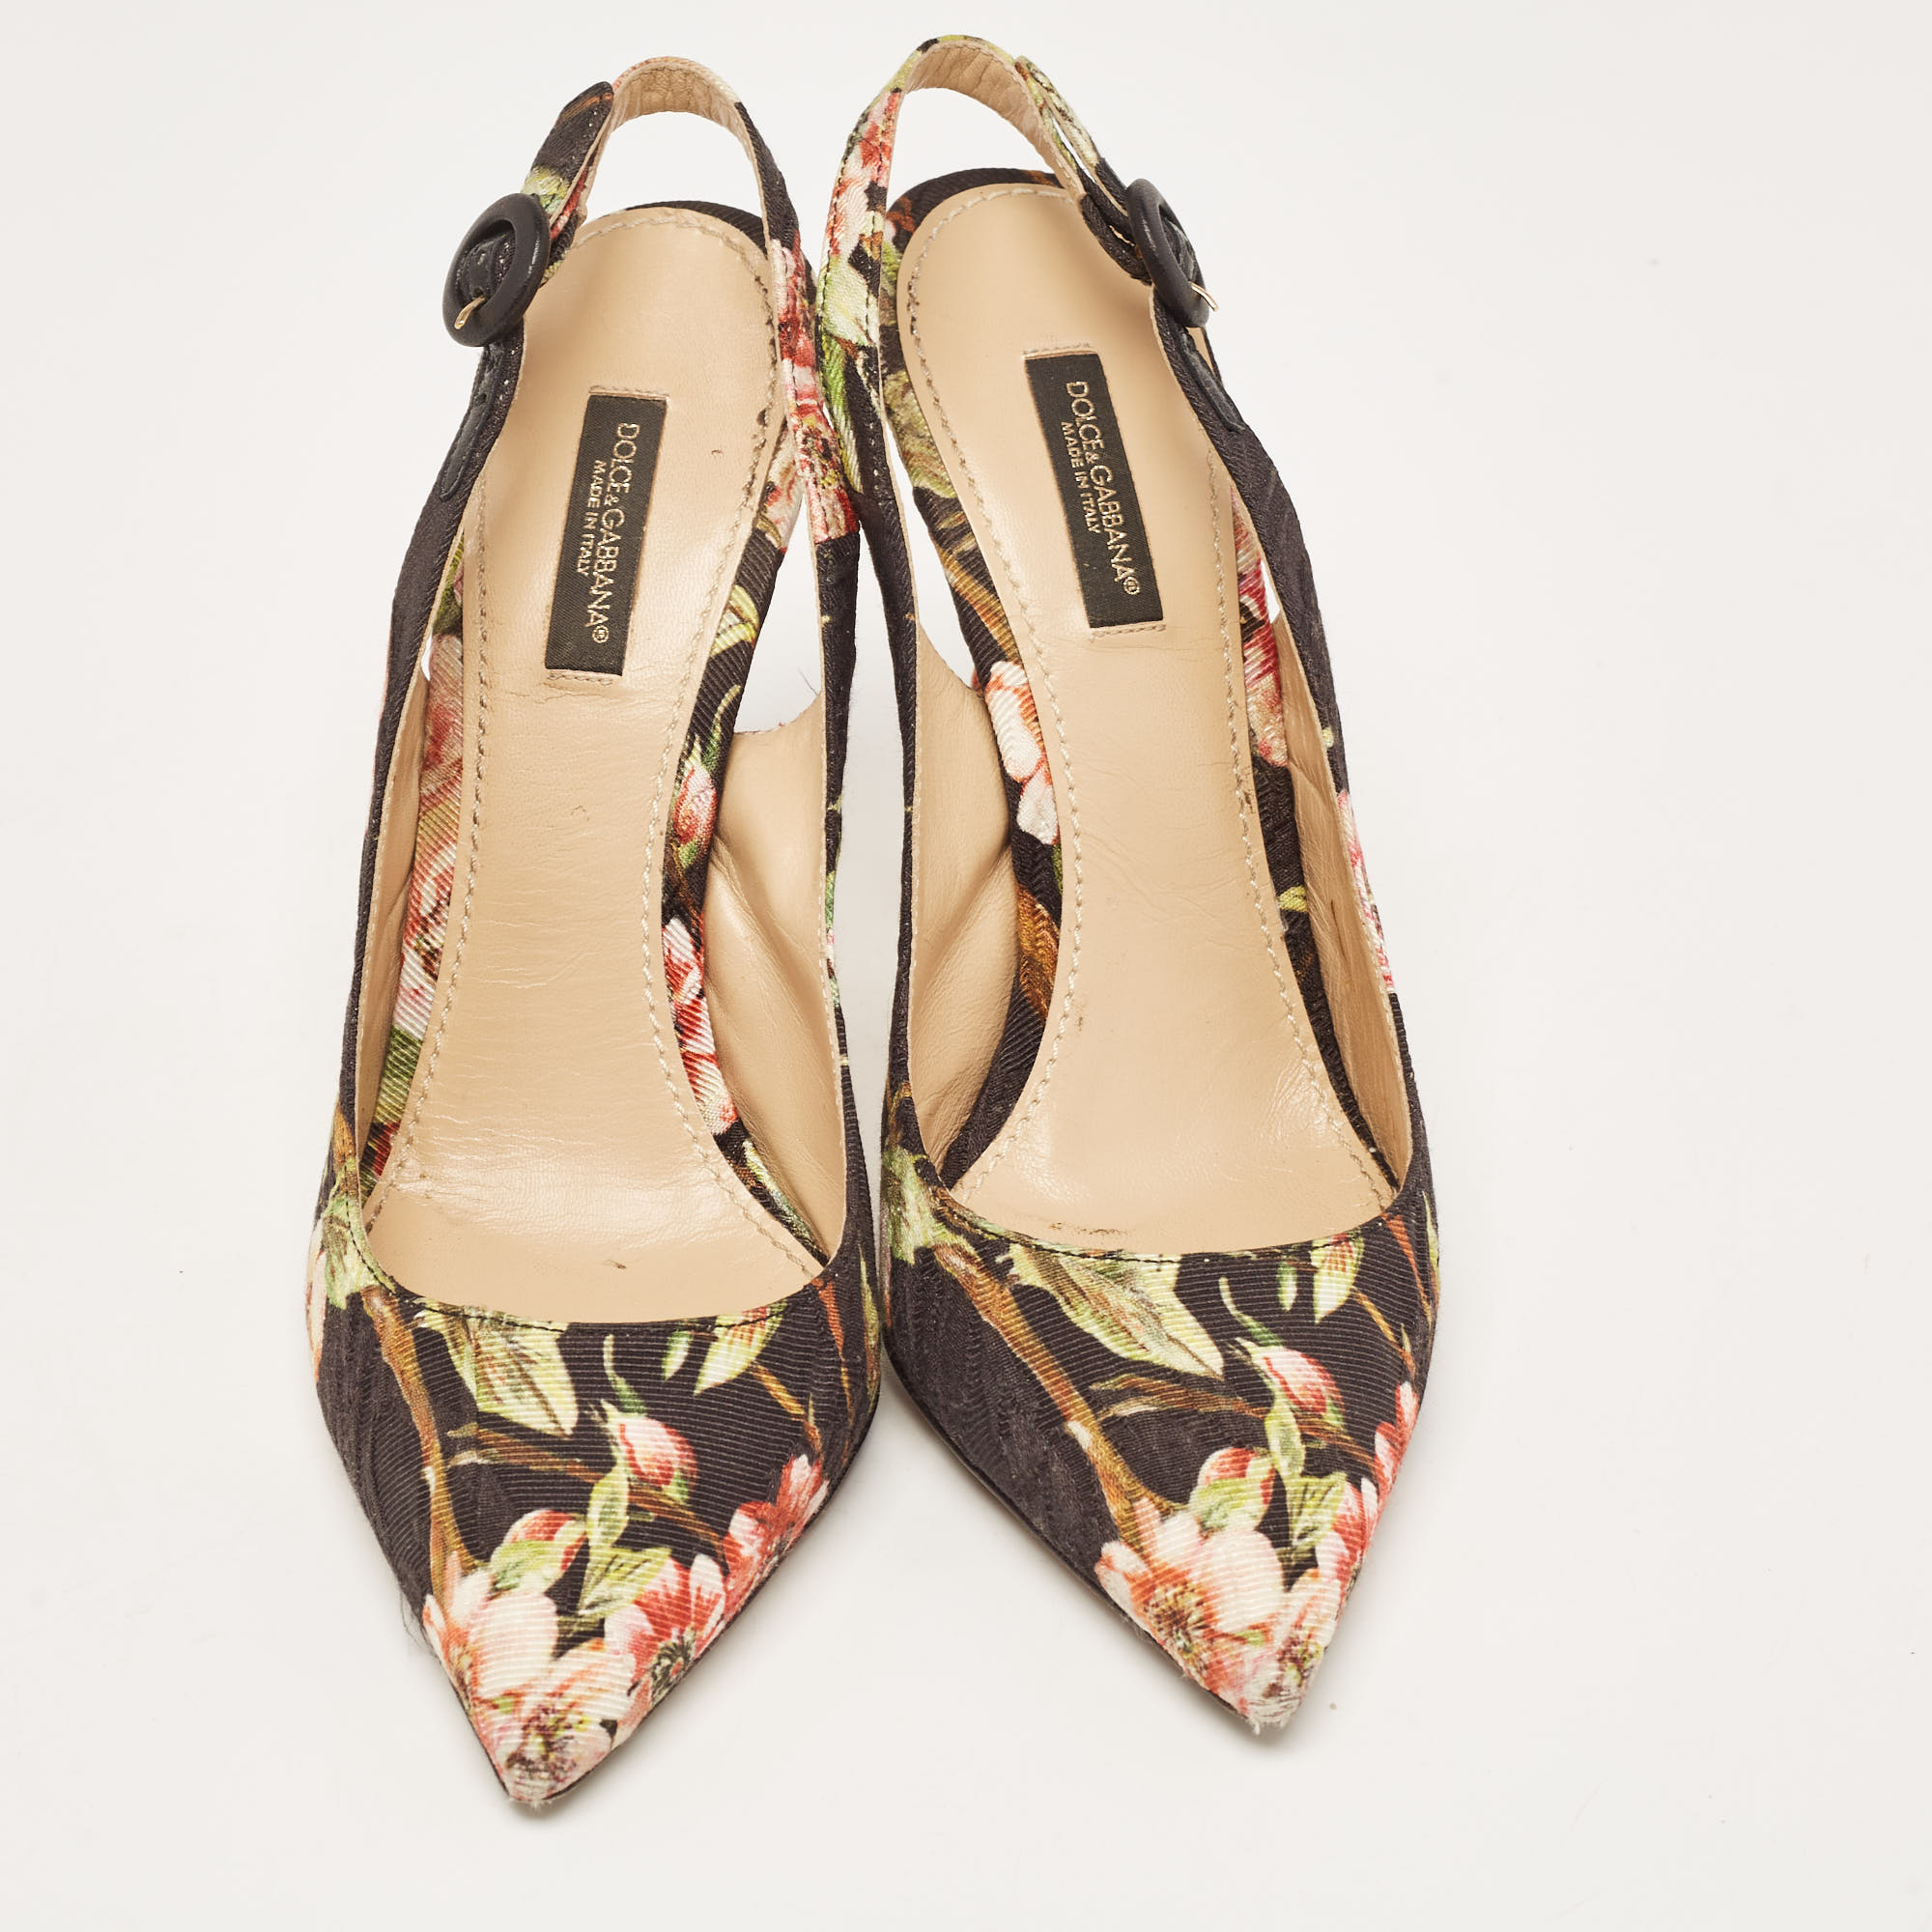 Dolce & Gabbana Multicolor Floral Print Brocade Slingback Pointed Toe Pumps Size 38